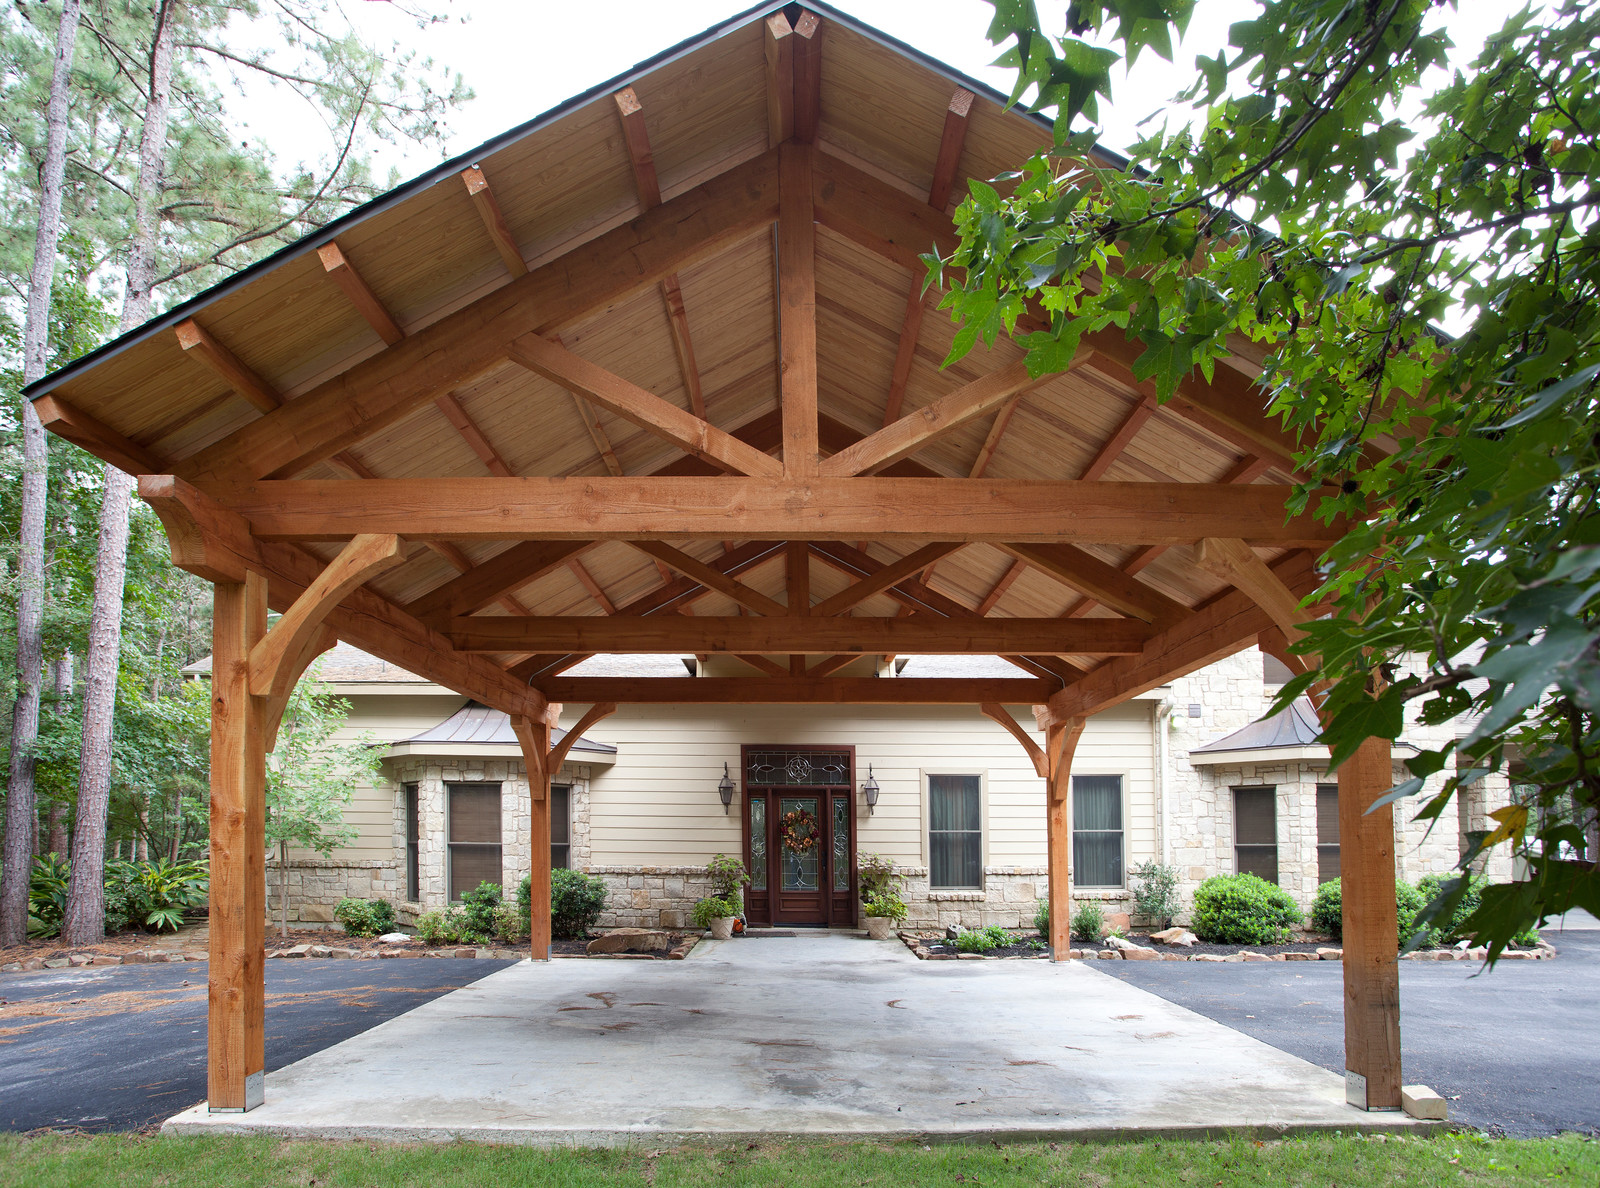 11 Most Adorable Post and Beam Carport That Can Be Easily Installed ... - Inspiration For A Timeless Post AnD Beam Carport In CeDar WooD